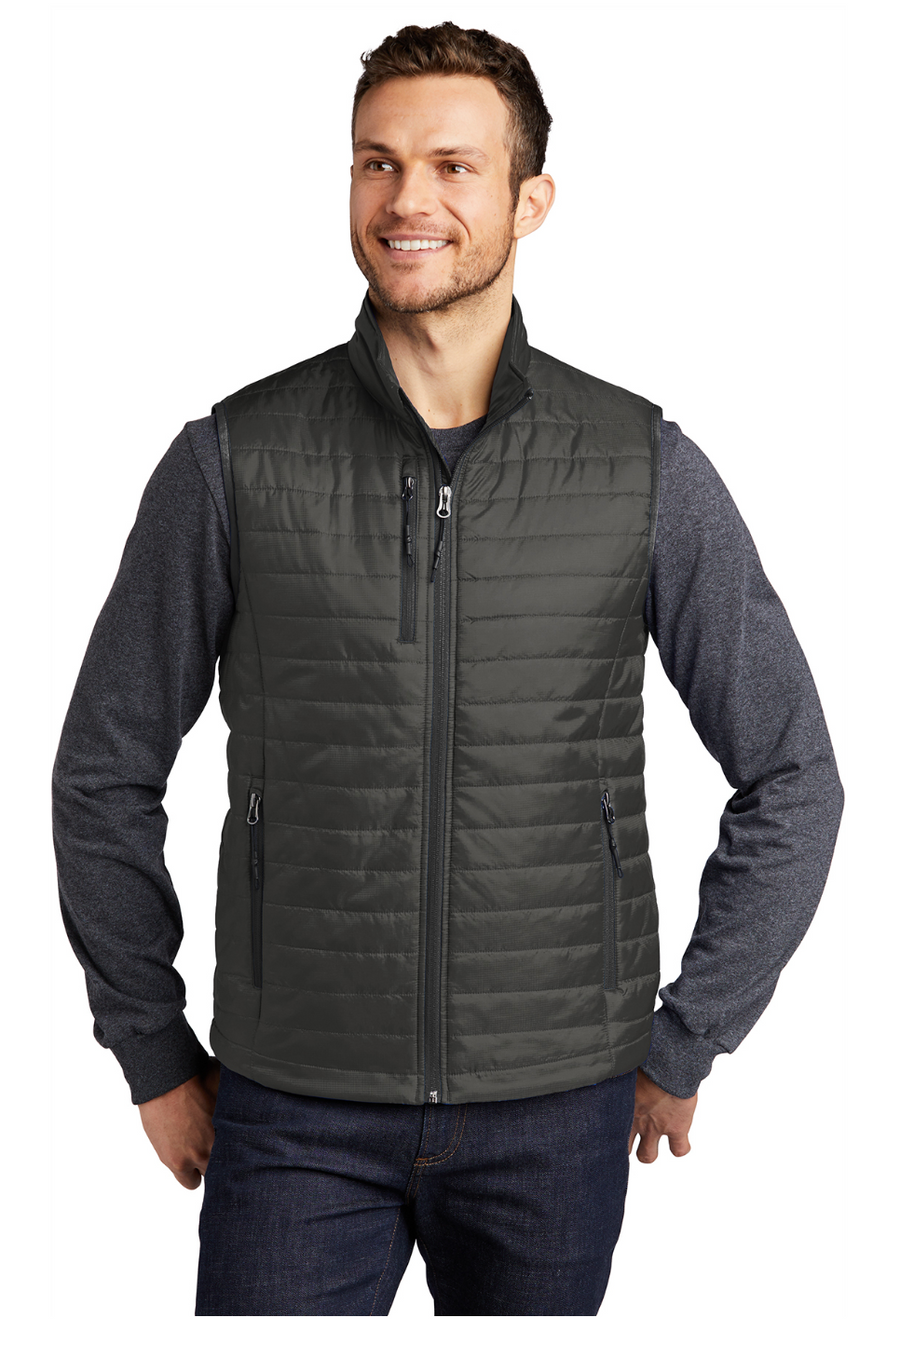 Authority Port Authority Packable Puffy Vest (Preorder)